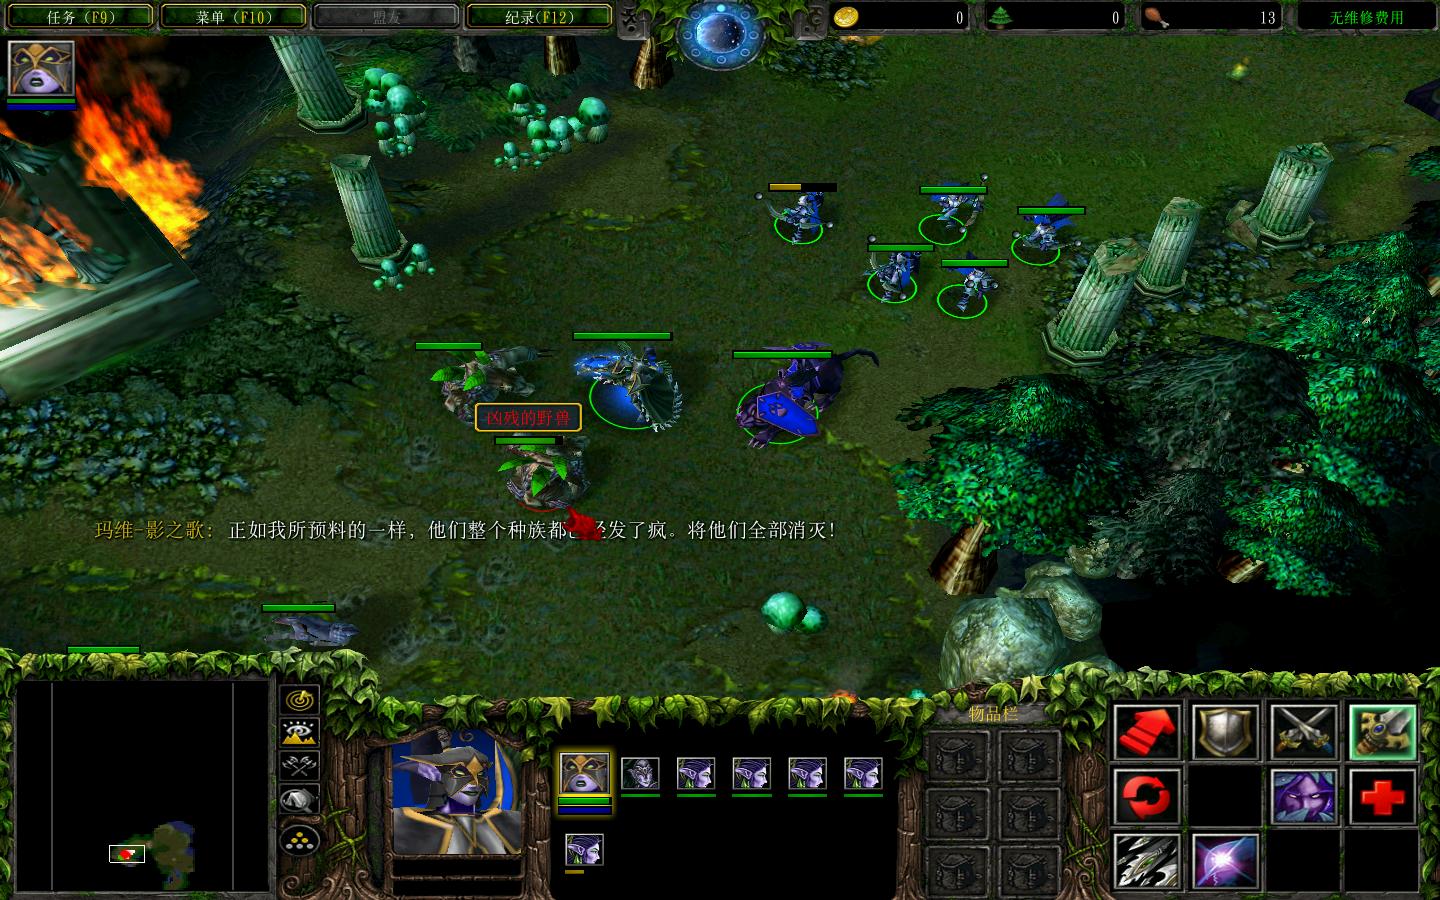 ħ3Warcraft III The Frozen Thronev1.24Ԫv1.71ʽ